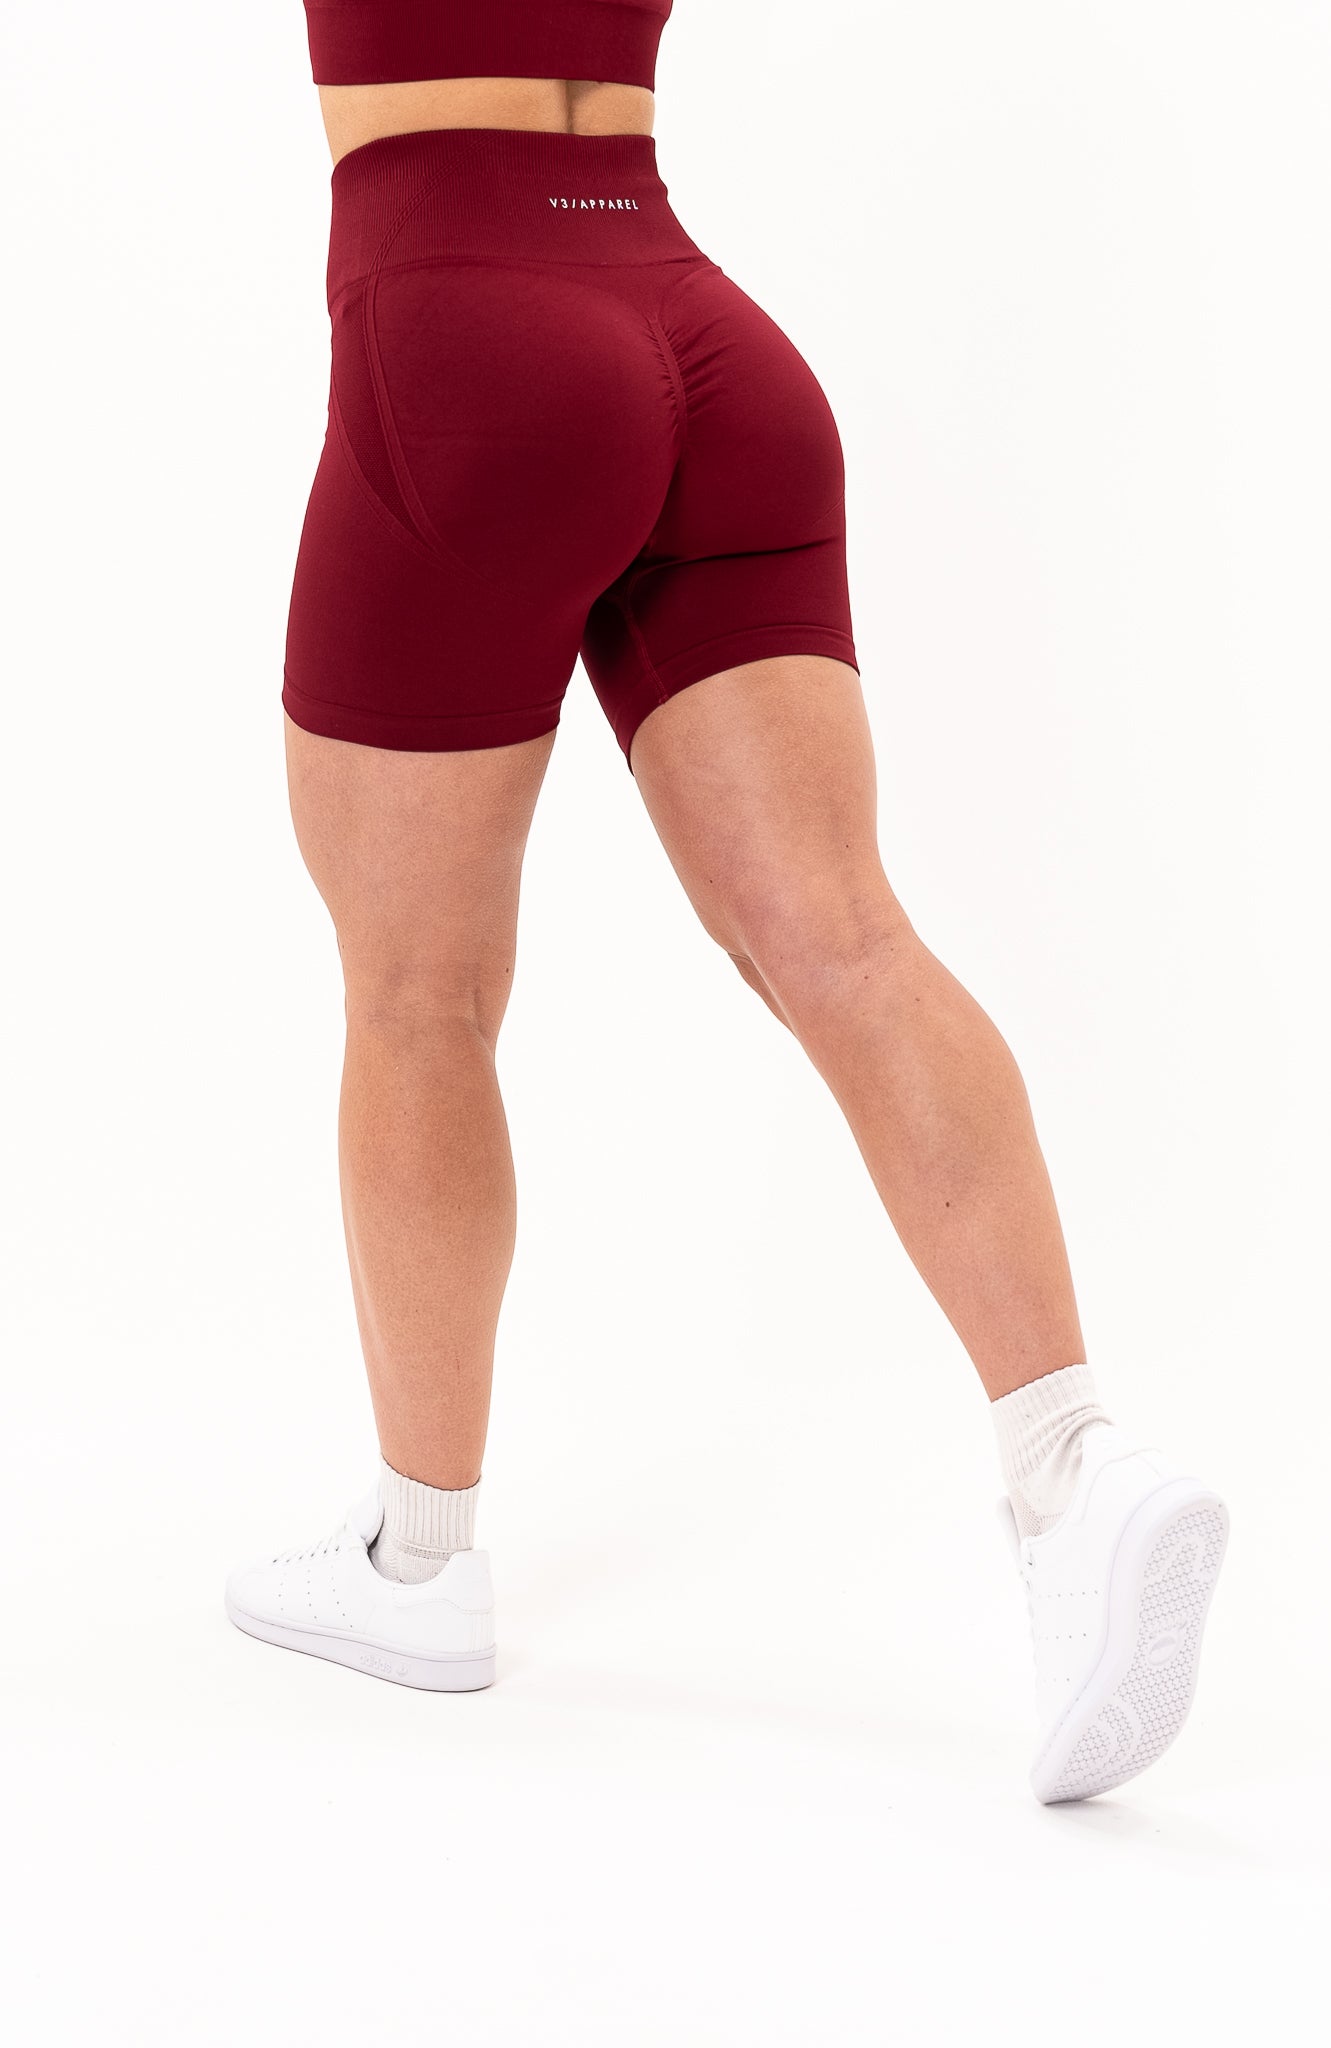 redbaysand Women's Tempo seamless scrunch bum shaping high waisted cycle shorts in burgundy red – Squat proof 5 inch leg gym shorts for workouts training, Running, yoga, bodybuilding and bikini fitness.